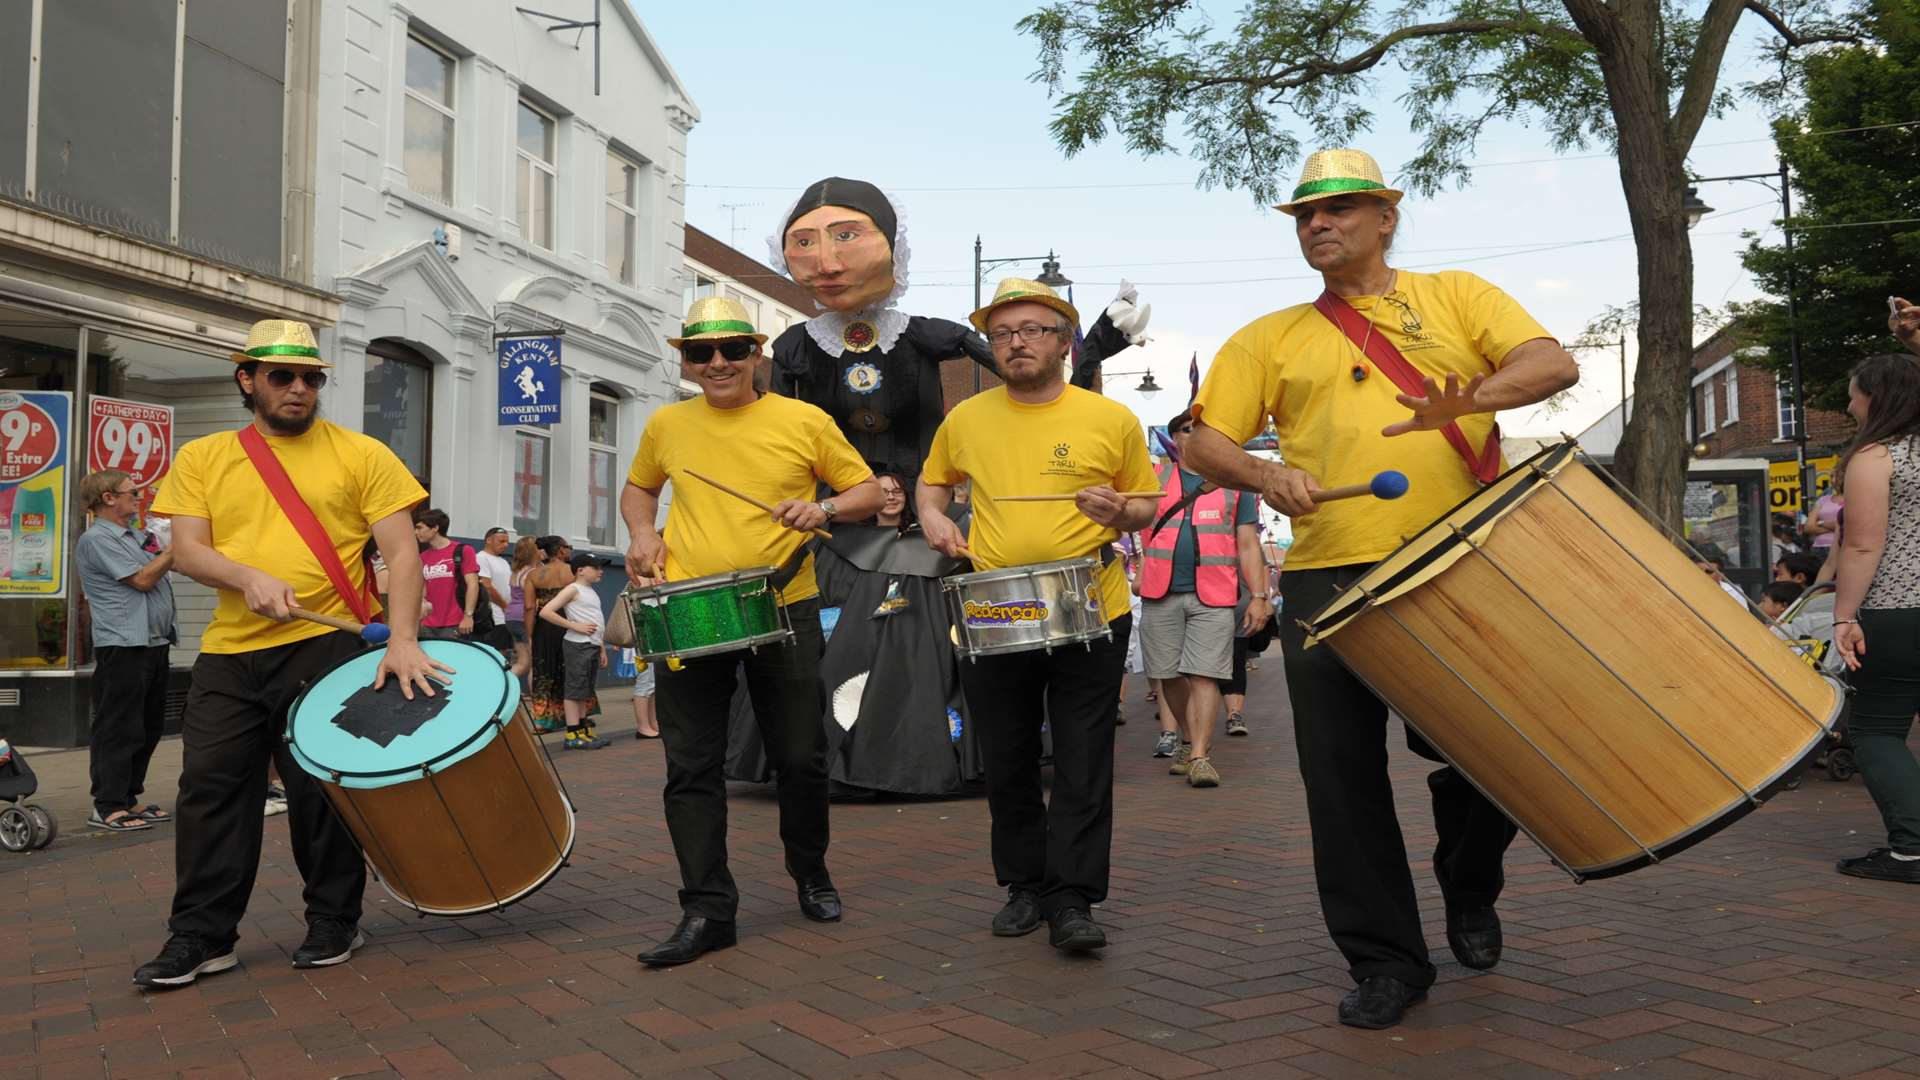 The Fuse Festival launches with a parade in Gillingham High Street.